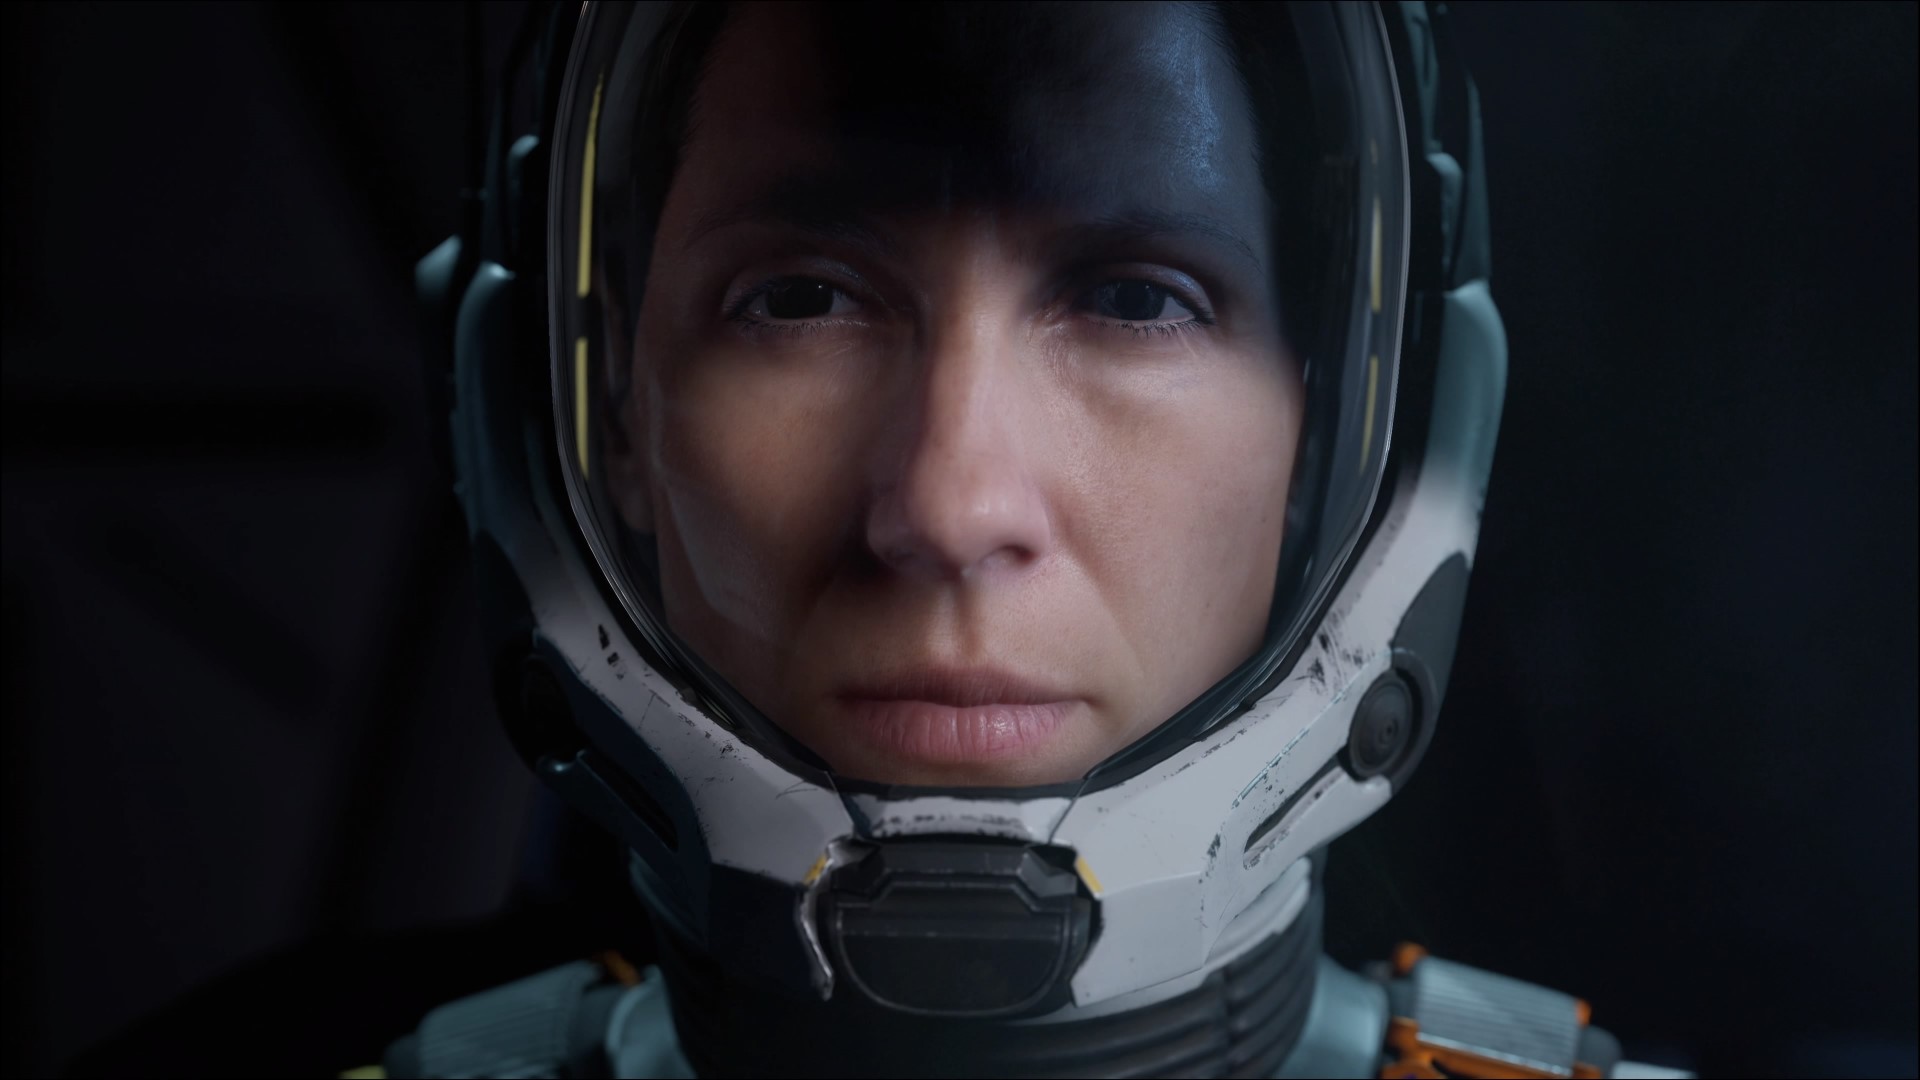 A full profile picture of Selene's face in her space suit